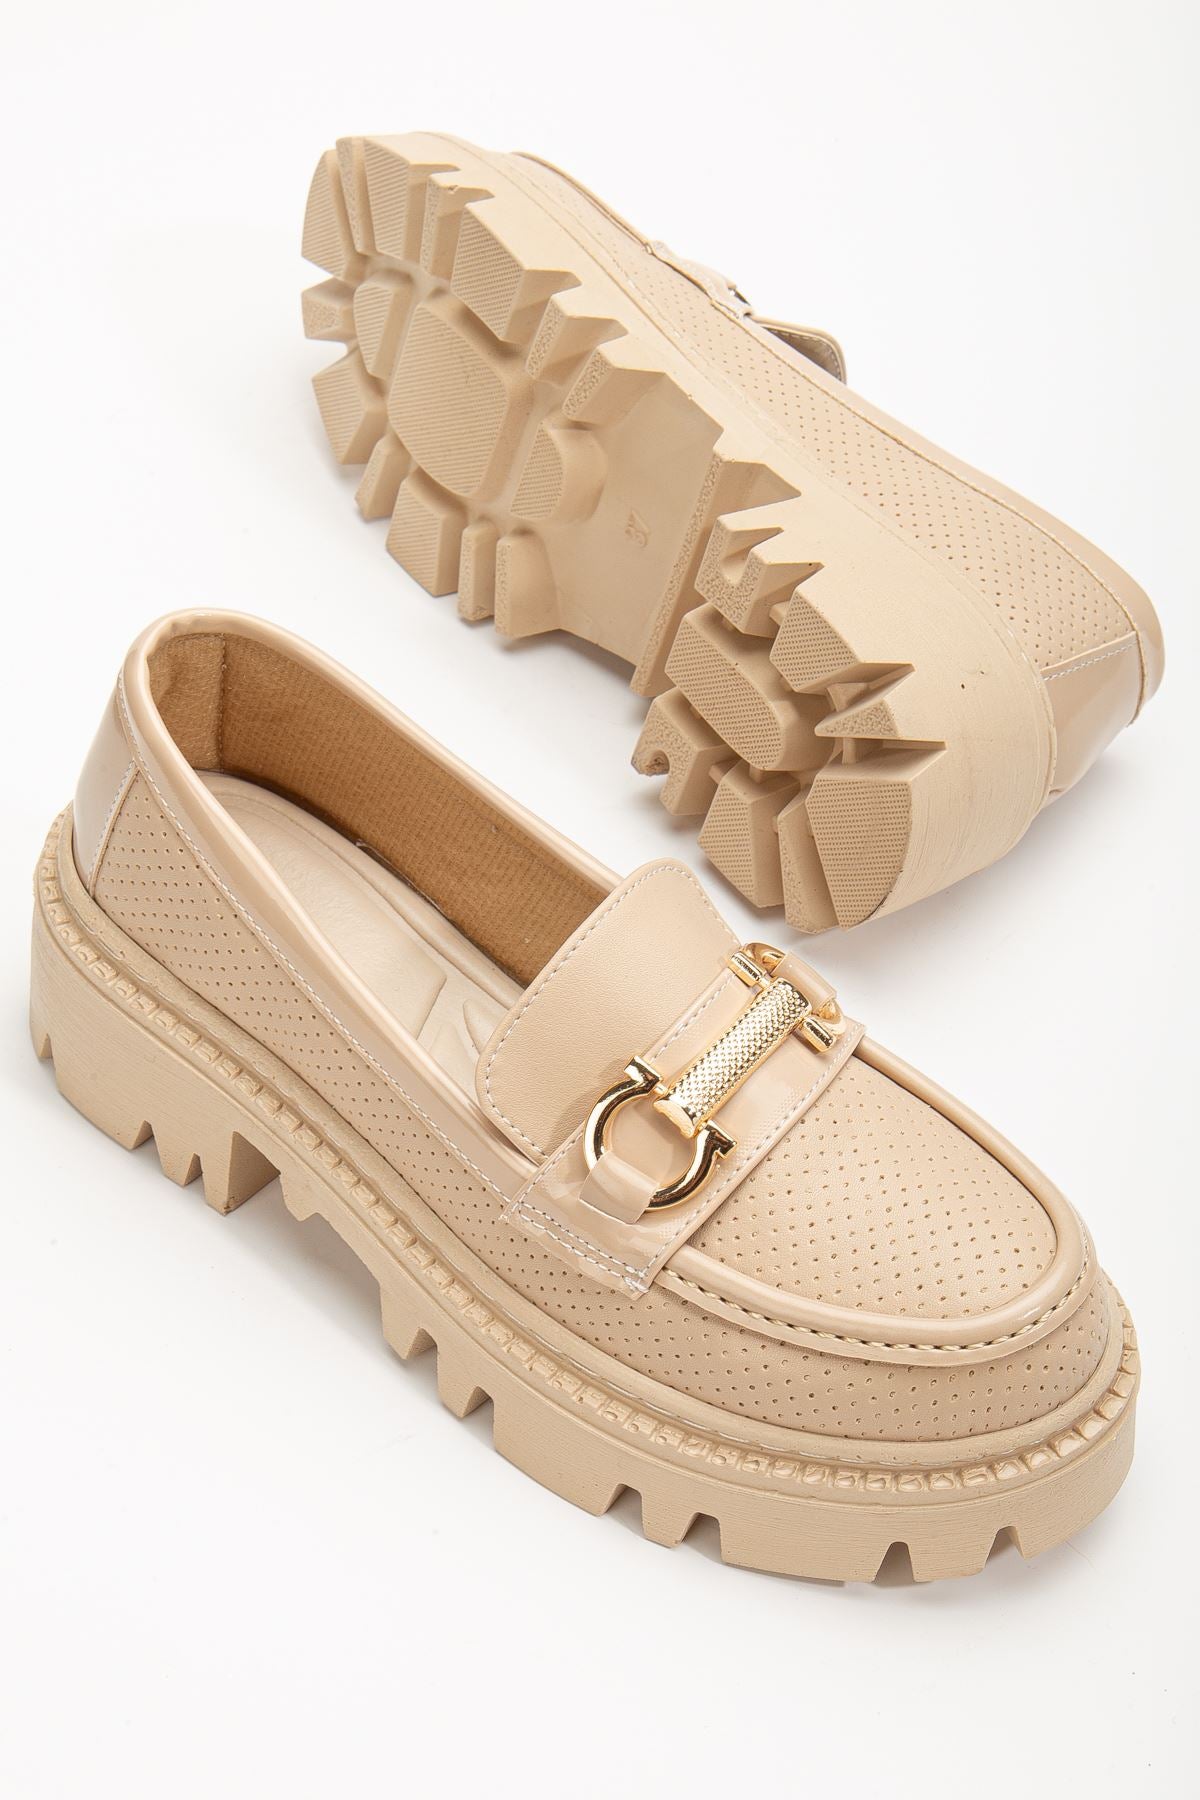 Women's Nude Buckle Detailed Oxford Shoes - STREETMODE™